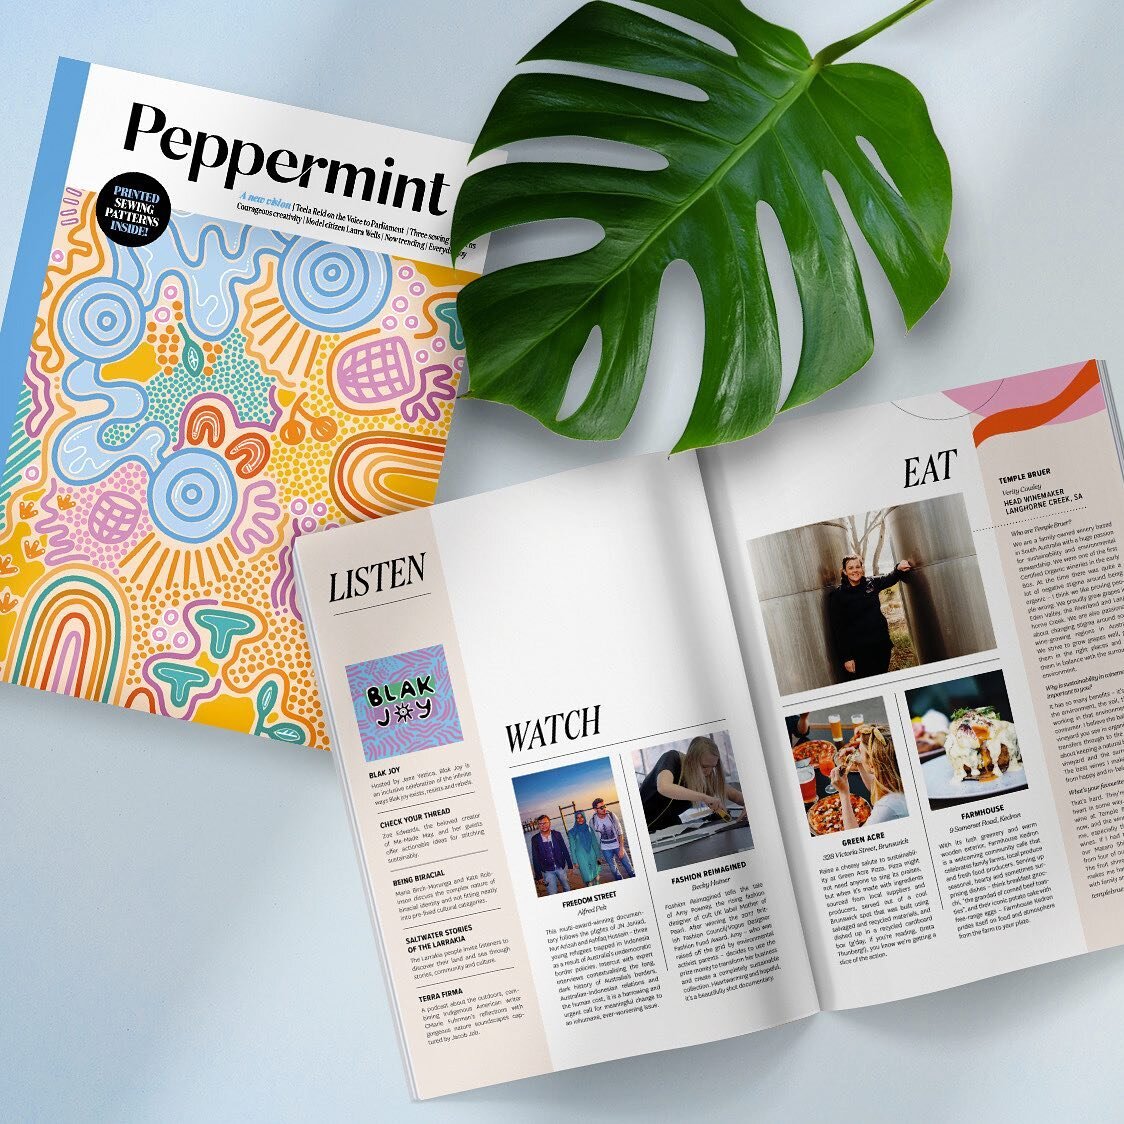 Thanks to @peppermintmagazine for recommending our podcast in their latest issue❤️